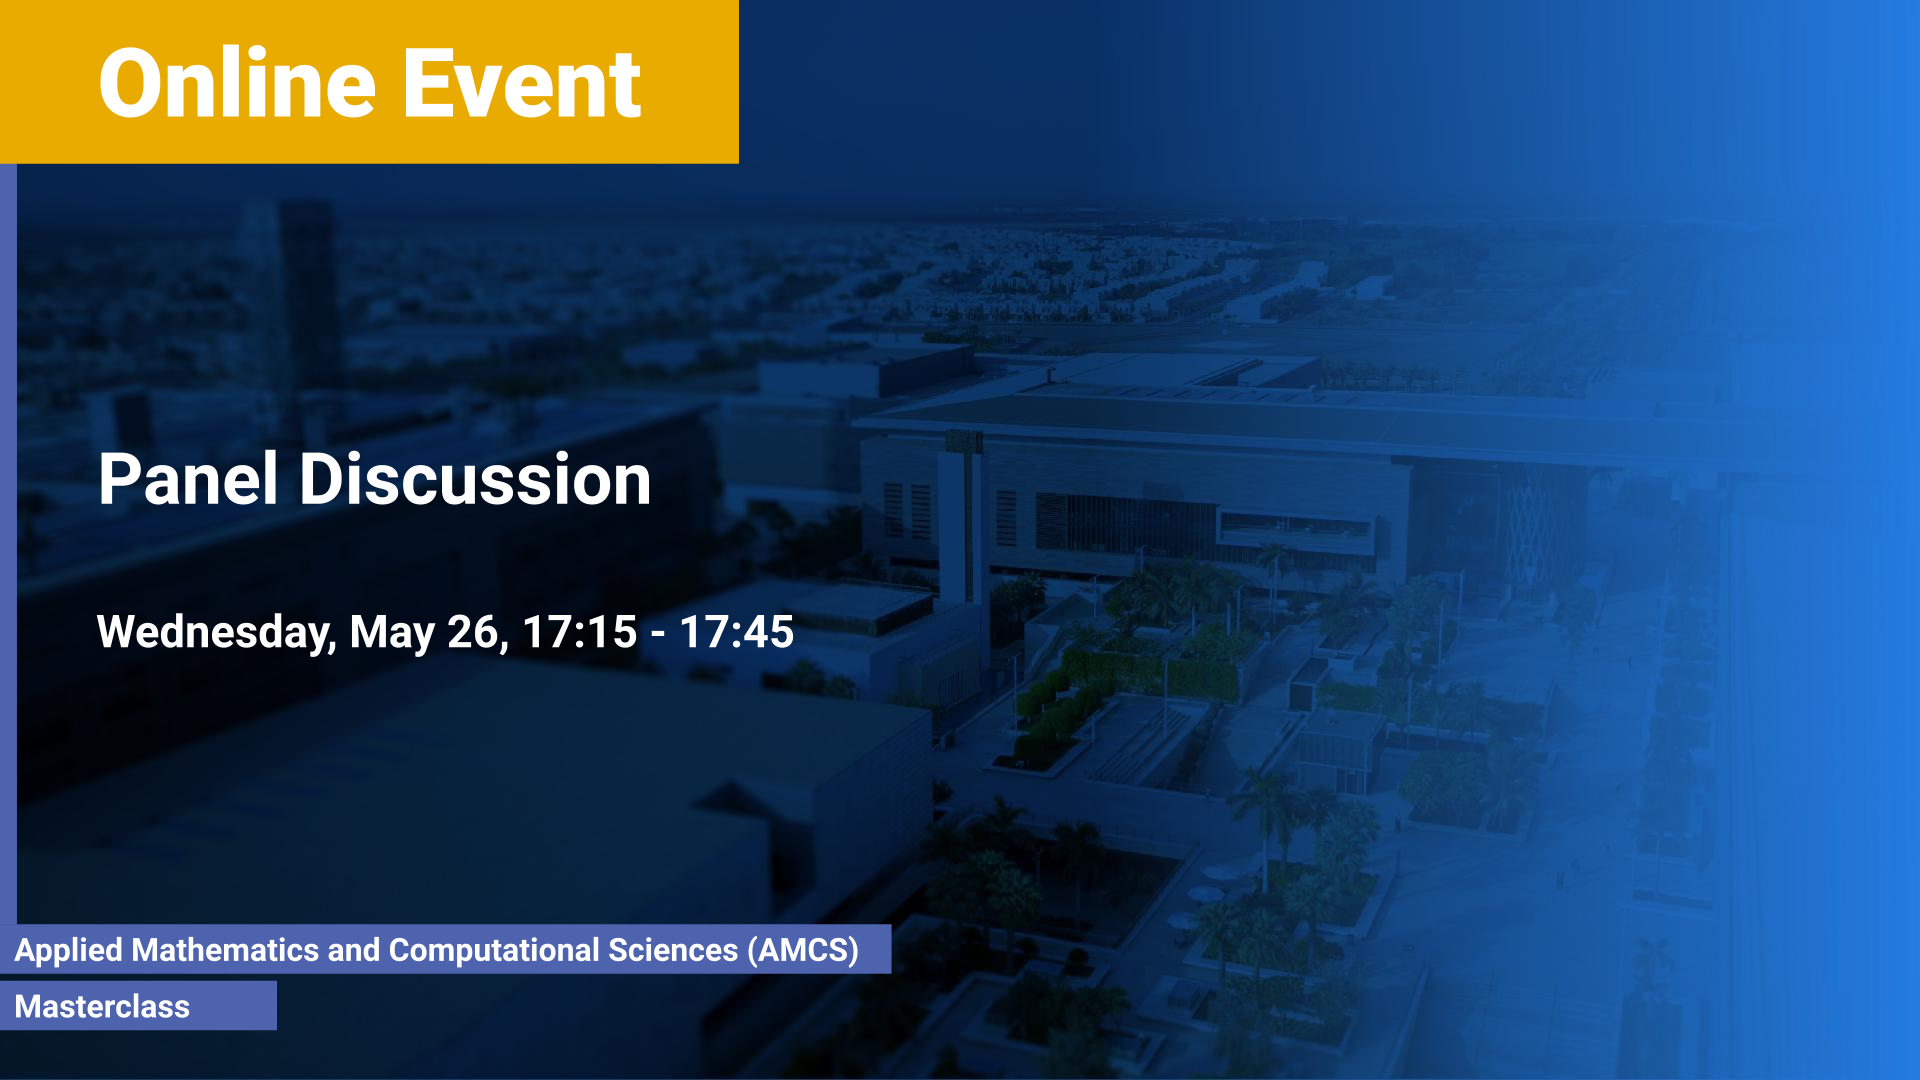 KAUST-CEMSE-AMCS-Masterclass-Numerical-Analysis-and-Scitifical-Computing-Panel Discussion-26th-May.png